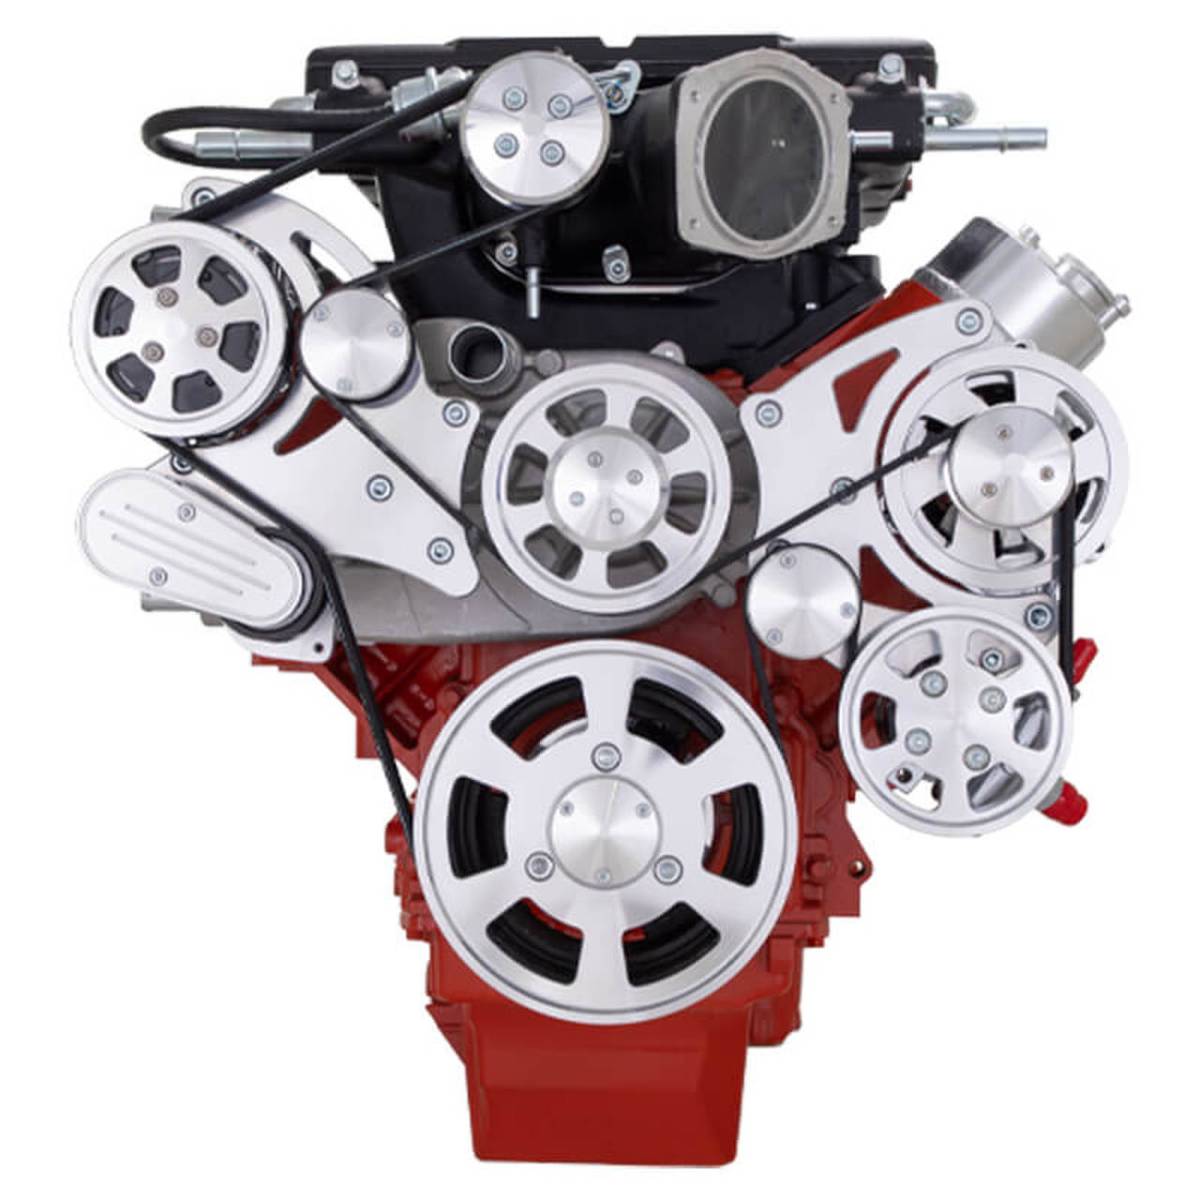 CVF Racing - CVF Wraptor Chevy LS Engine Whipple 2.3L or 2.9L Serpentine Bracket System with Alternator AC and Power Steering - Polished - Image 1